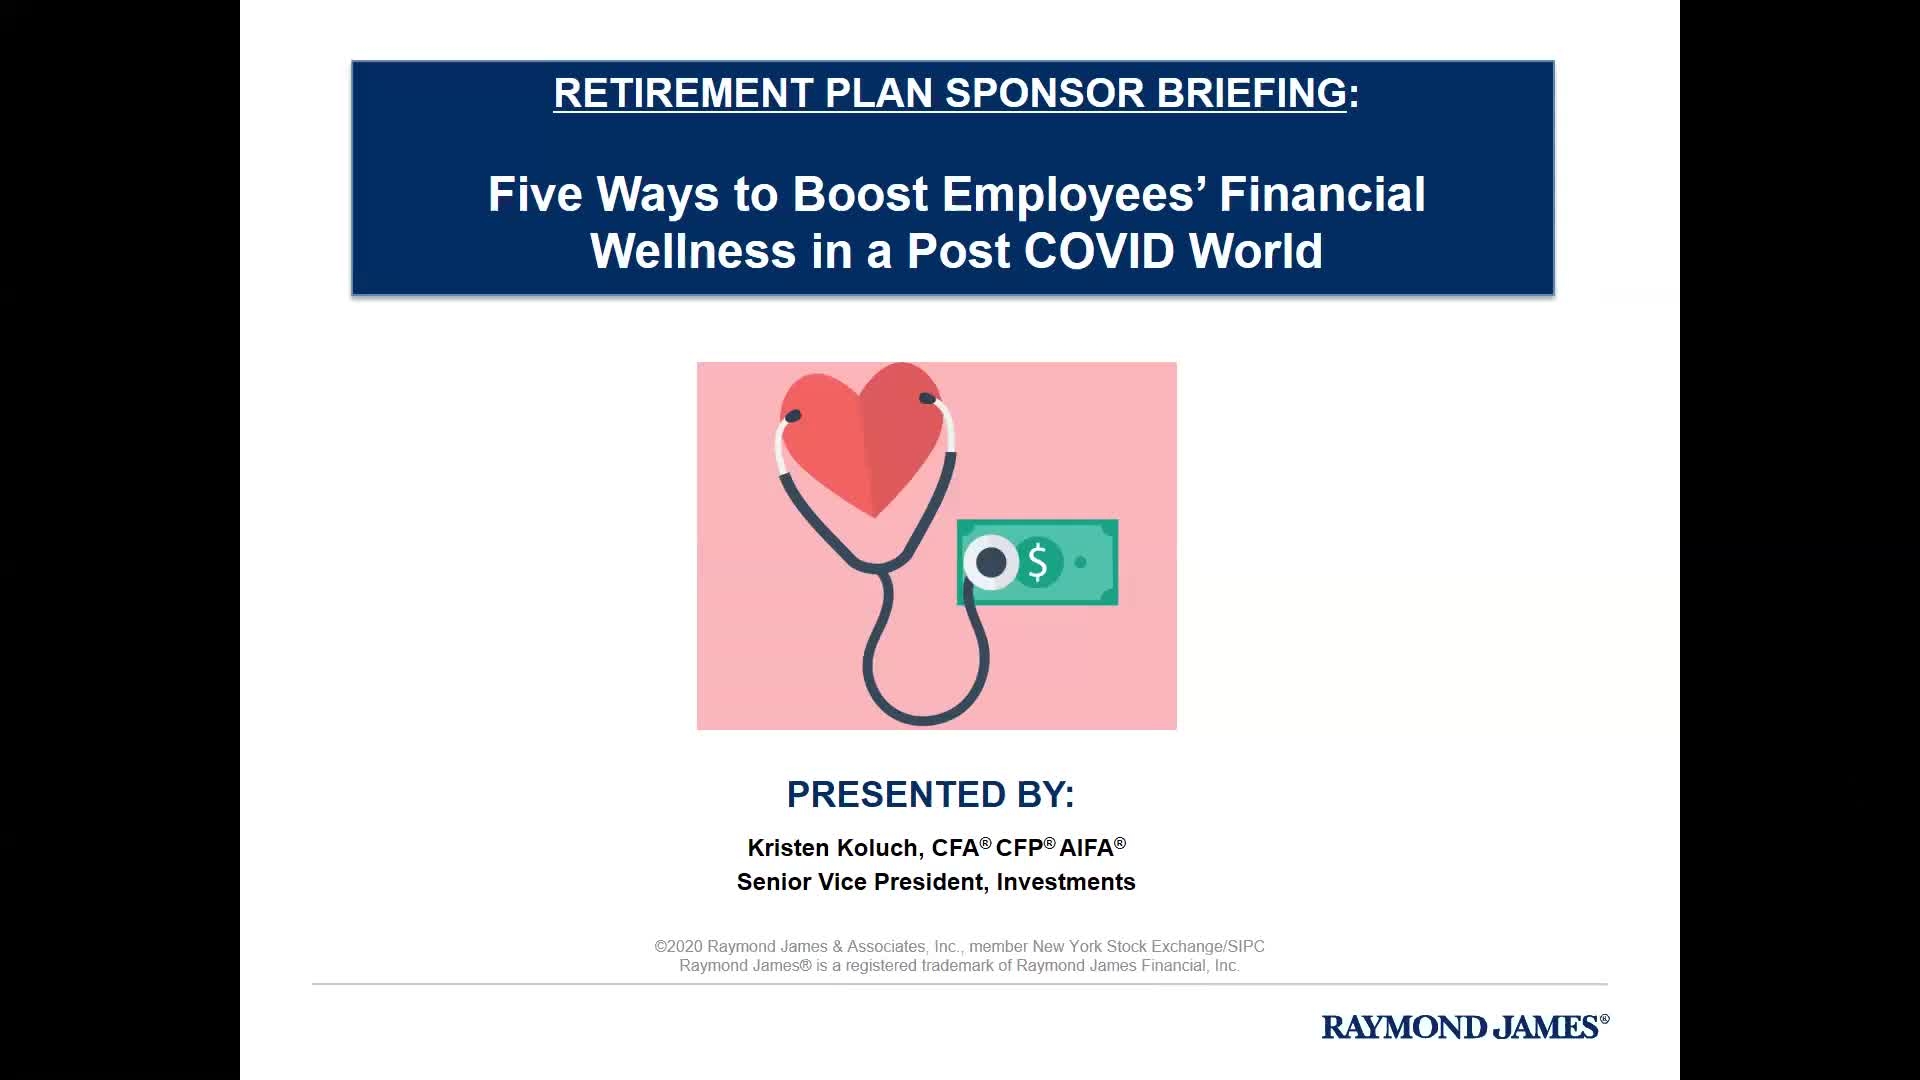 Five Ways to Boost Employees' Financial Wellness in a Post COVID World